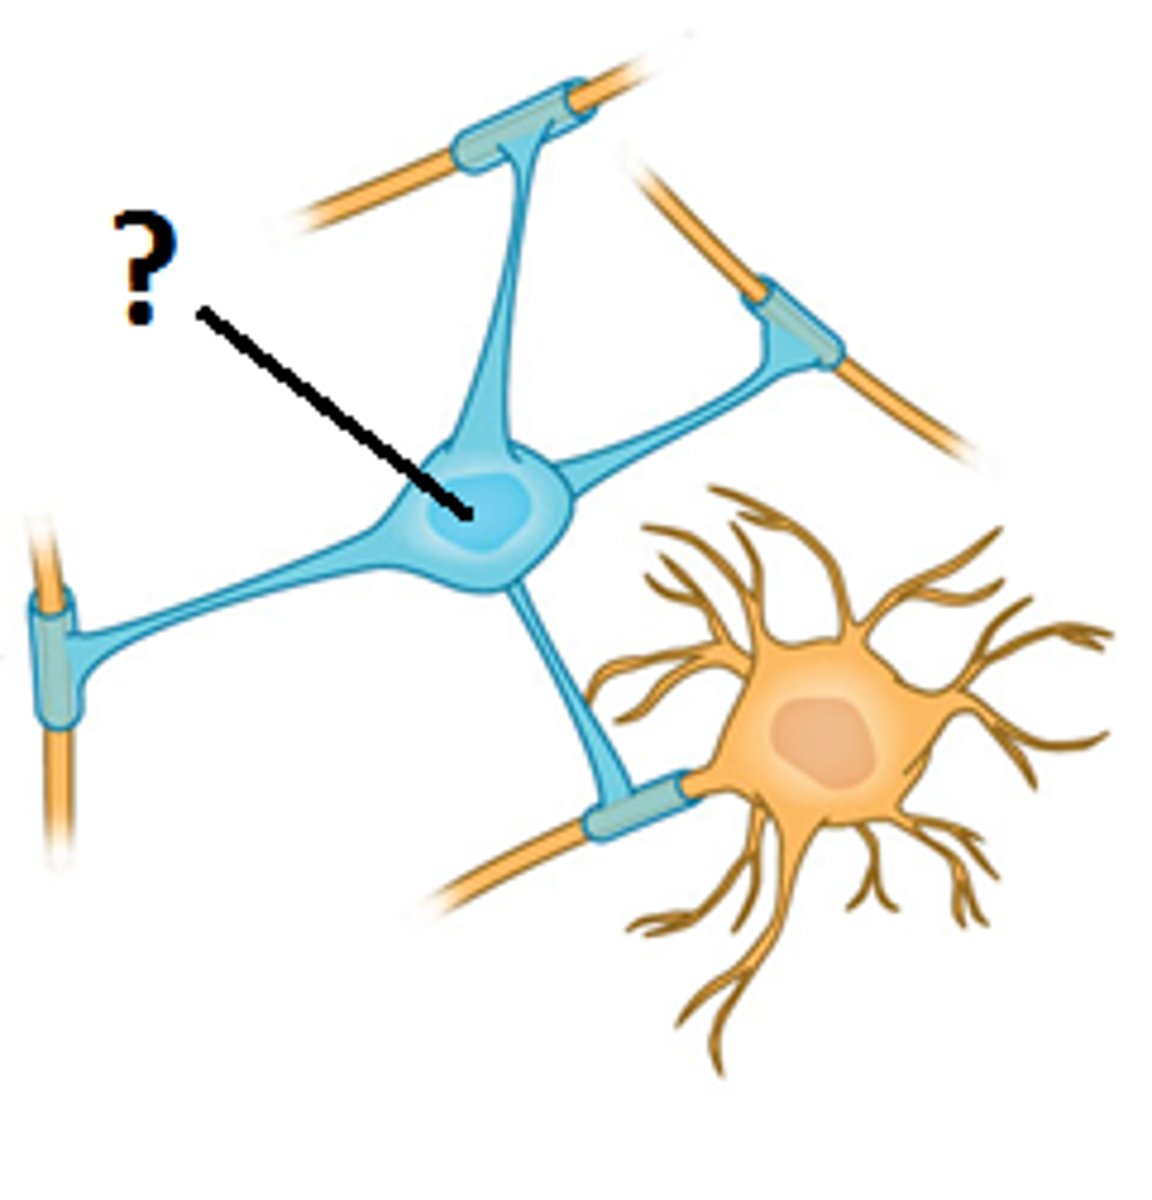 <p>myelinate axons in the CNS</p><p>can myelinate multiple parts of multiple axons</p><p>inhibit regeneration of neurons</p>